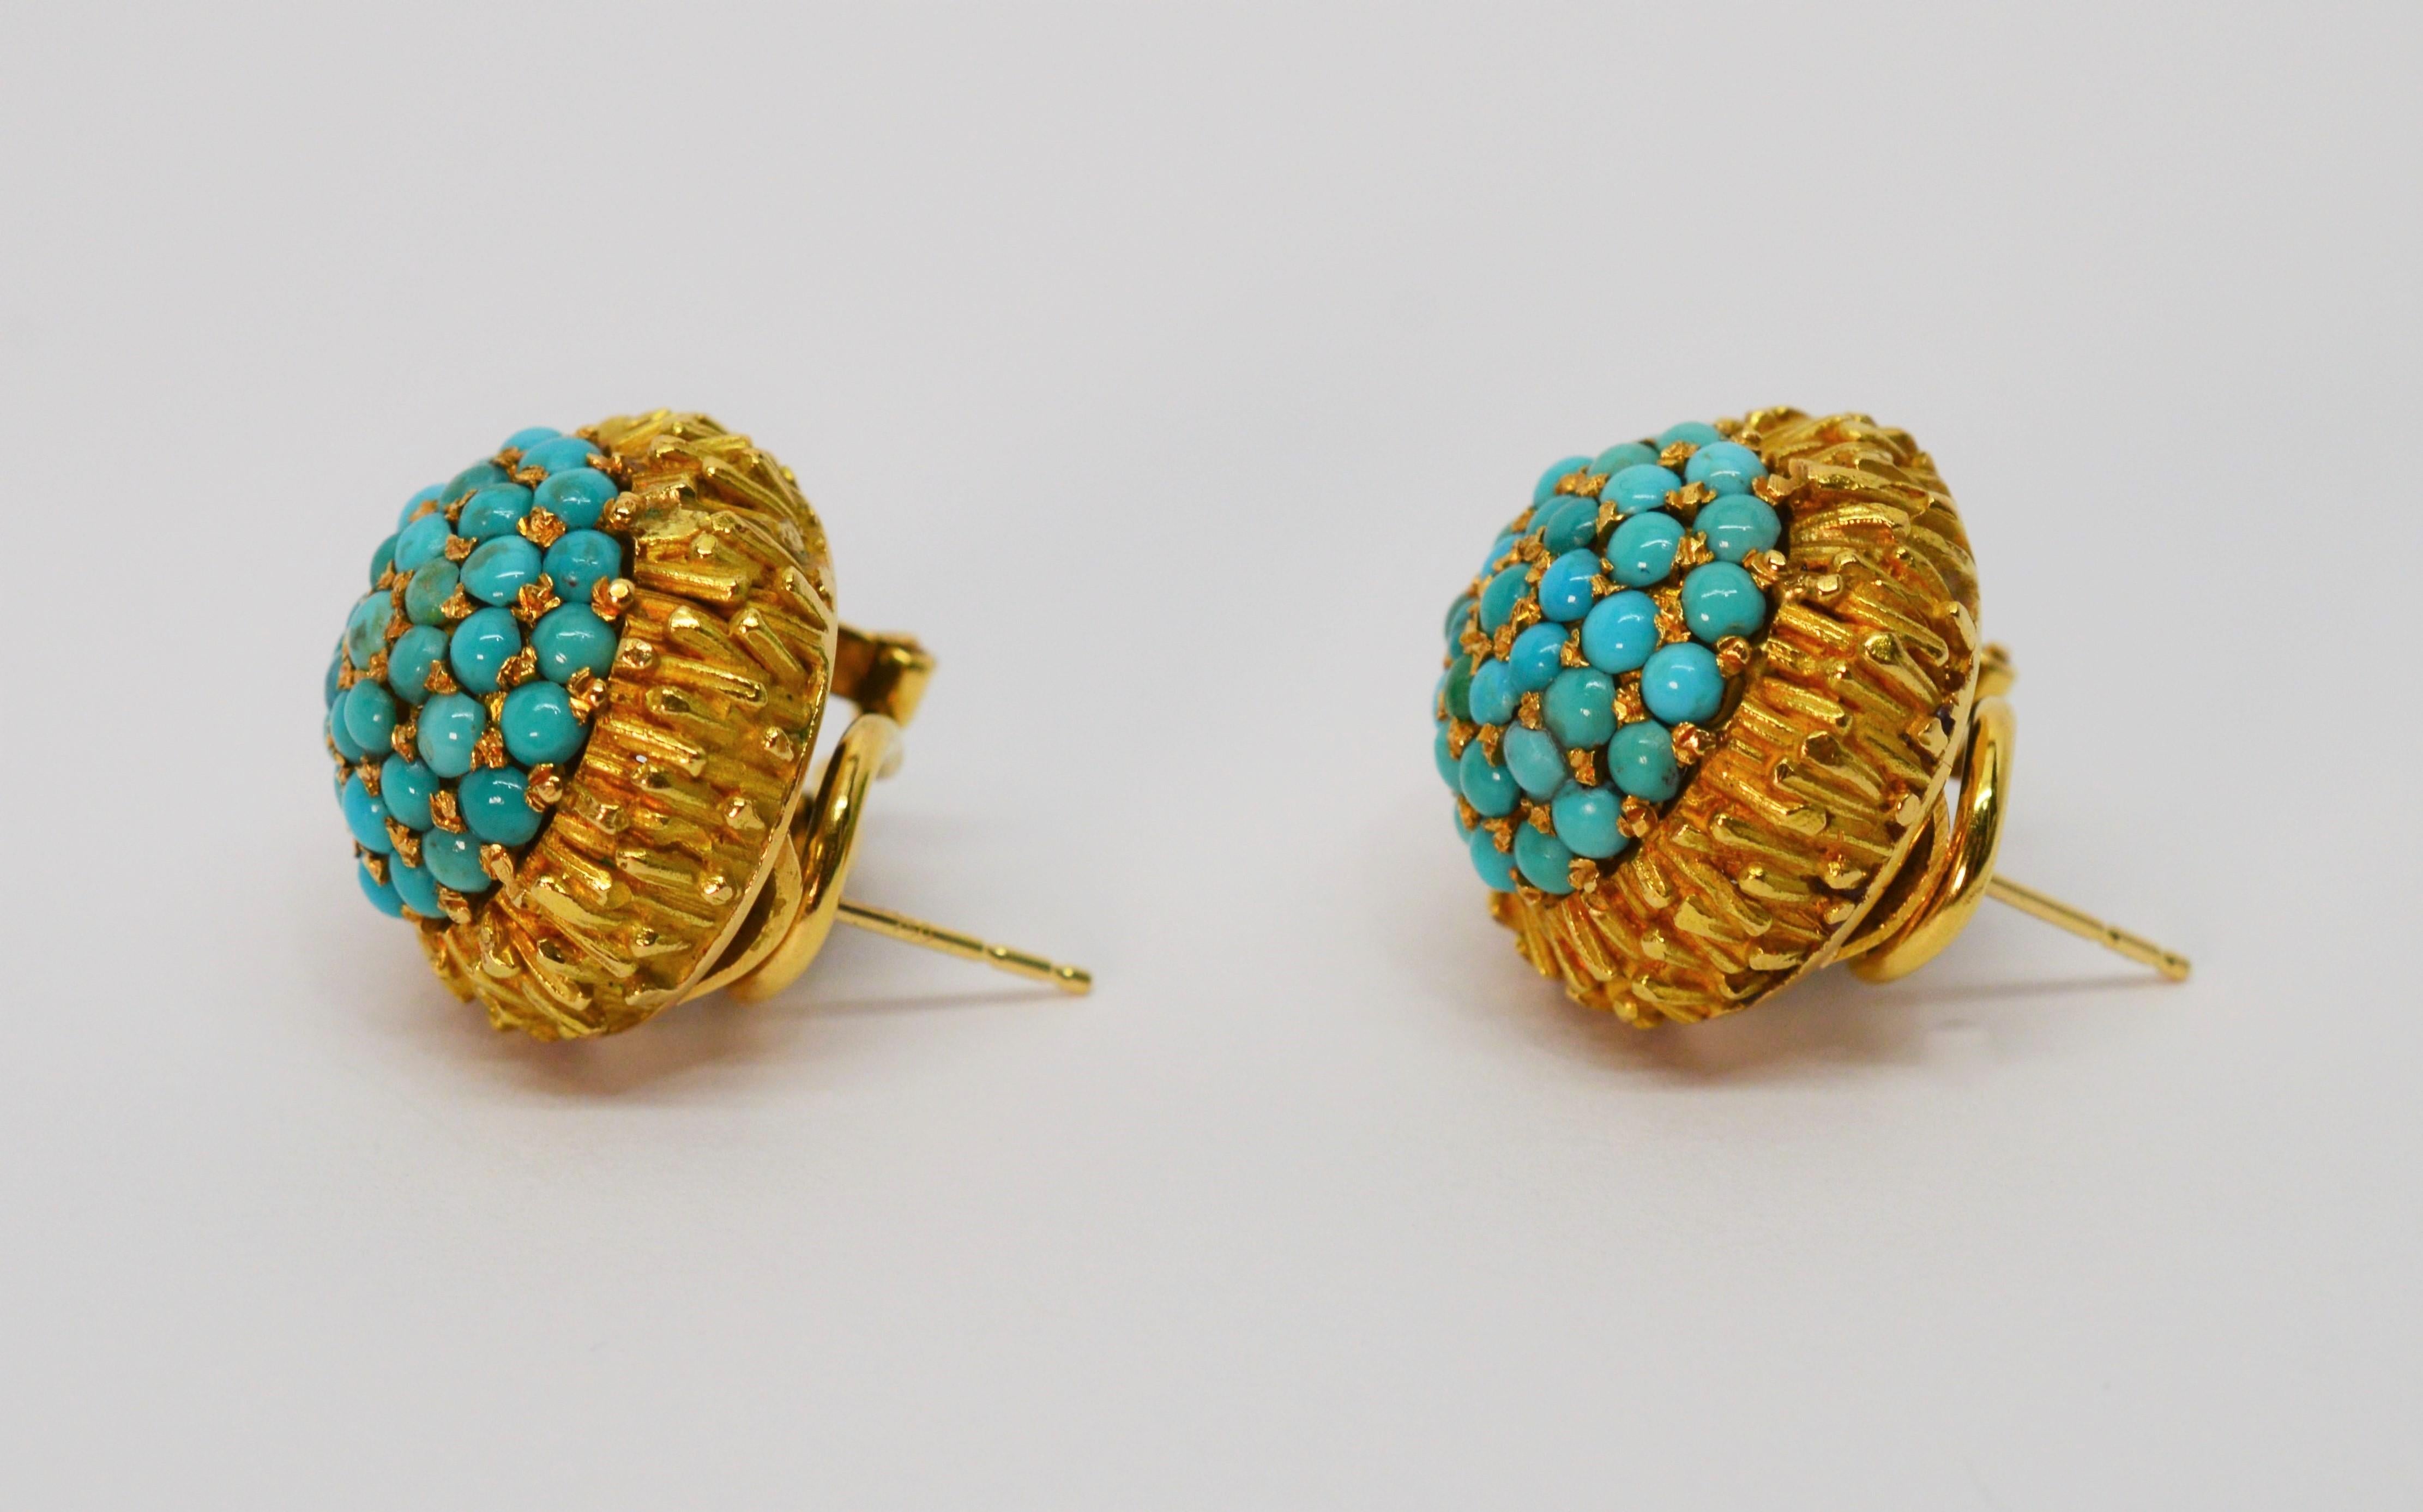 This pair of vintage stud earrings has great color resulting from the natural hues of unusual pave set turquoise cabochons complemented by the rich eighteen karat 18K yellow gold.
For pierced ears, these stylish stud earrings are fitted with omega